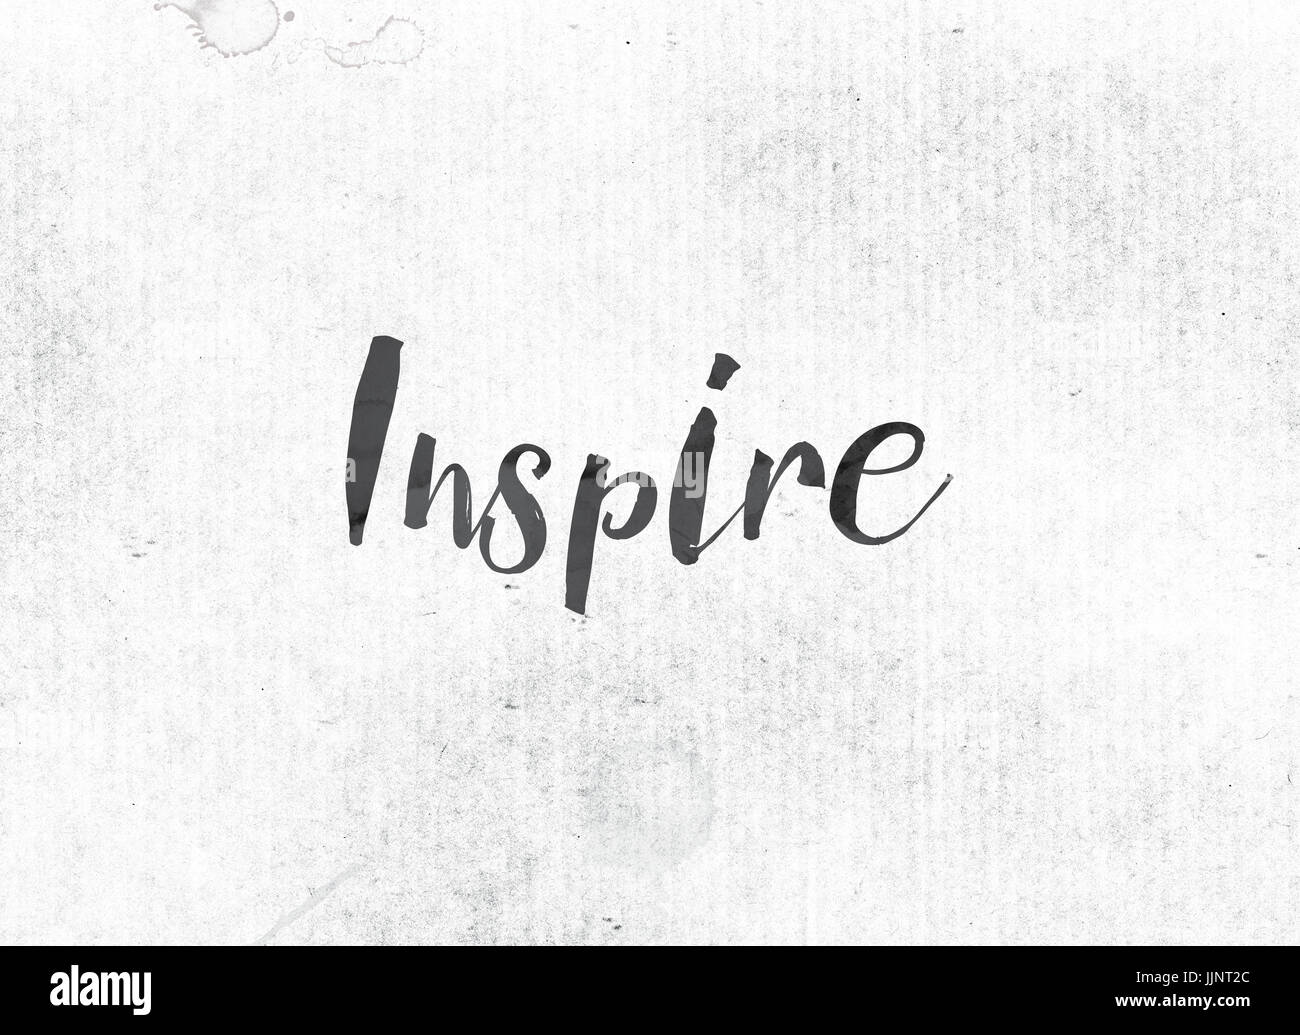 The word Inspire concept and theme painted in black ink on a watercolor ...